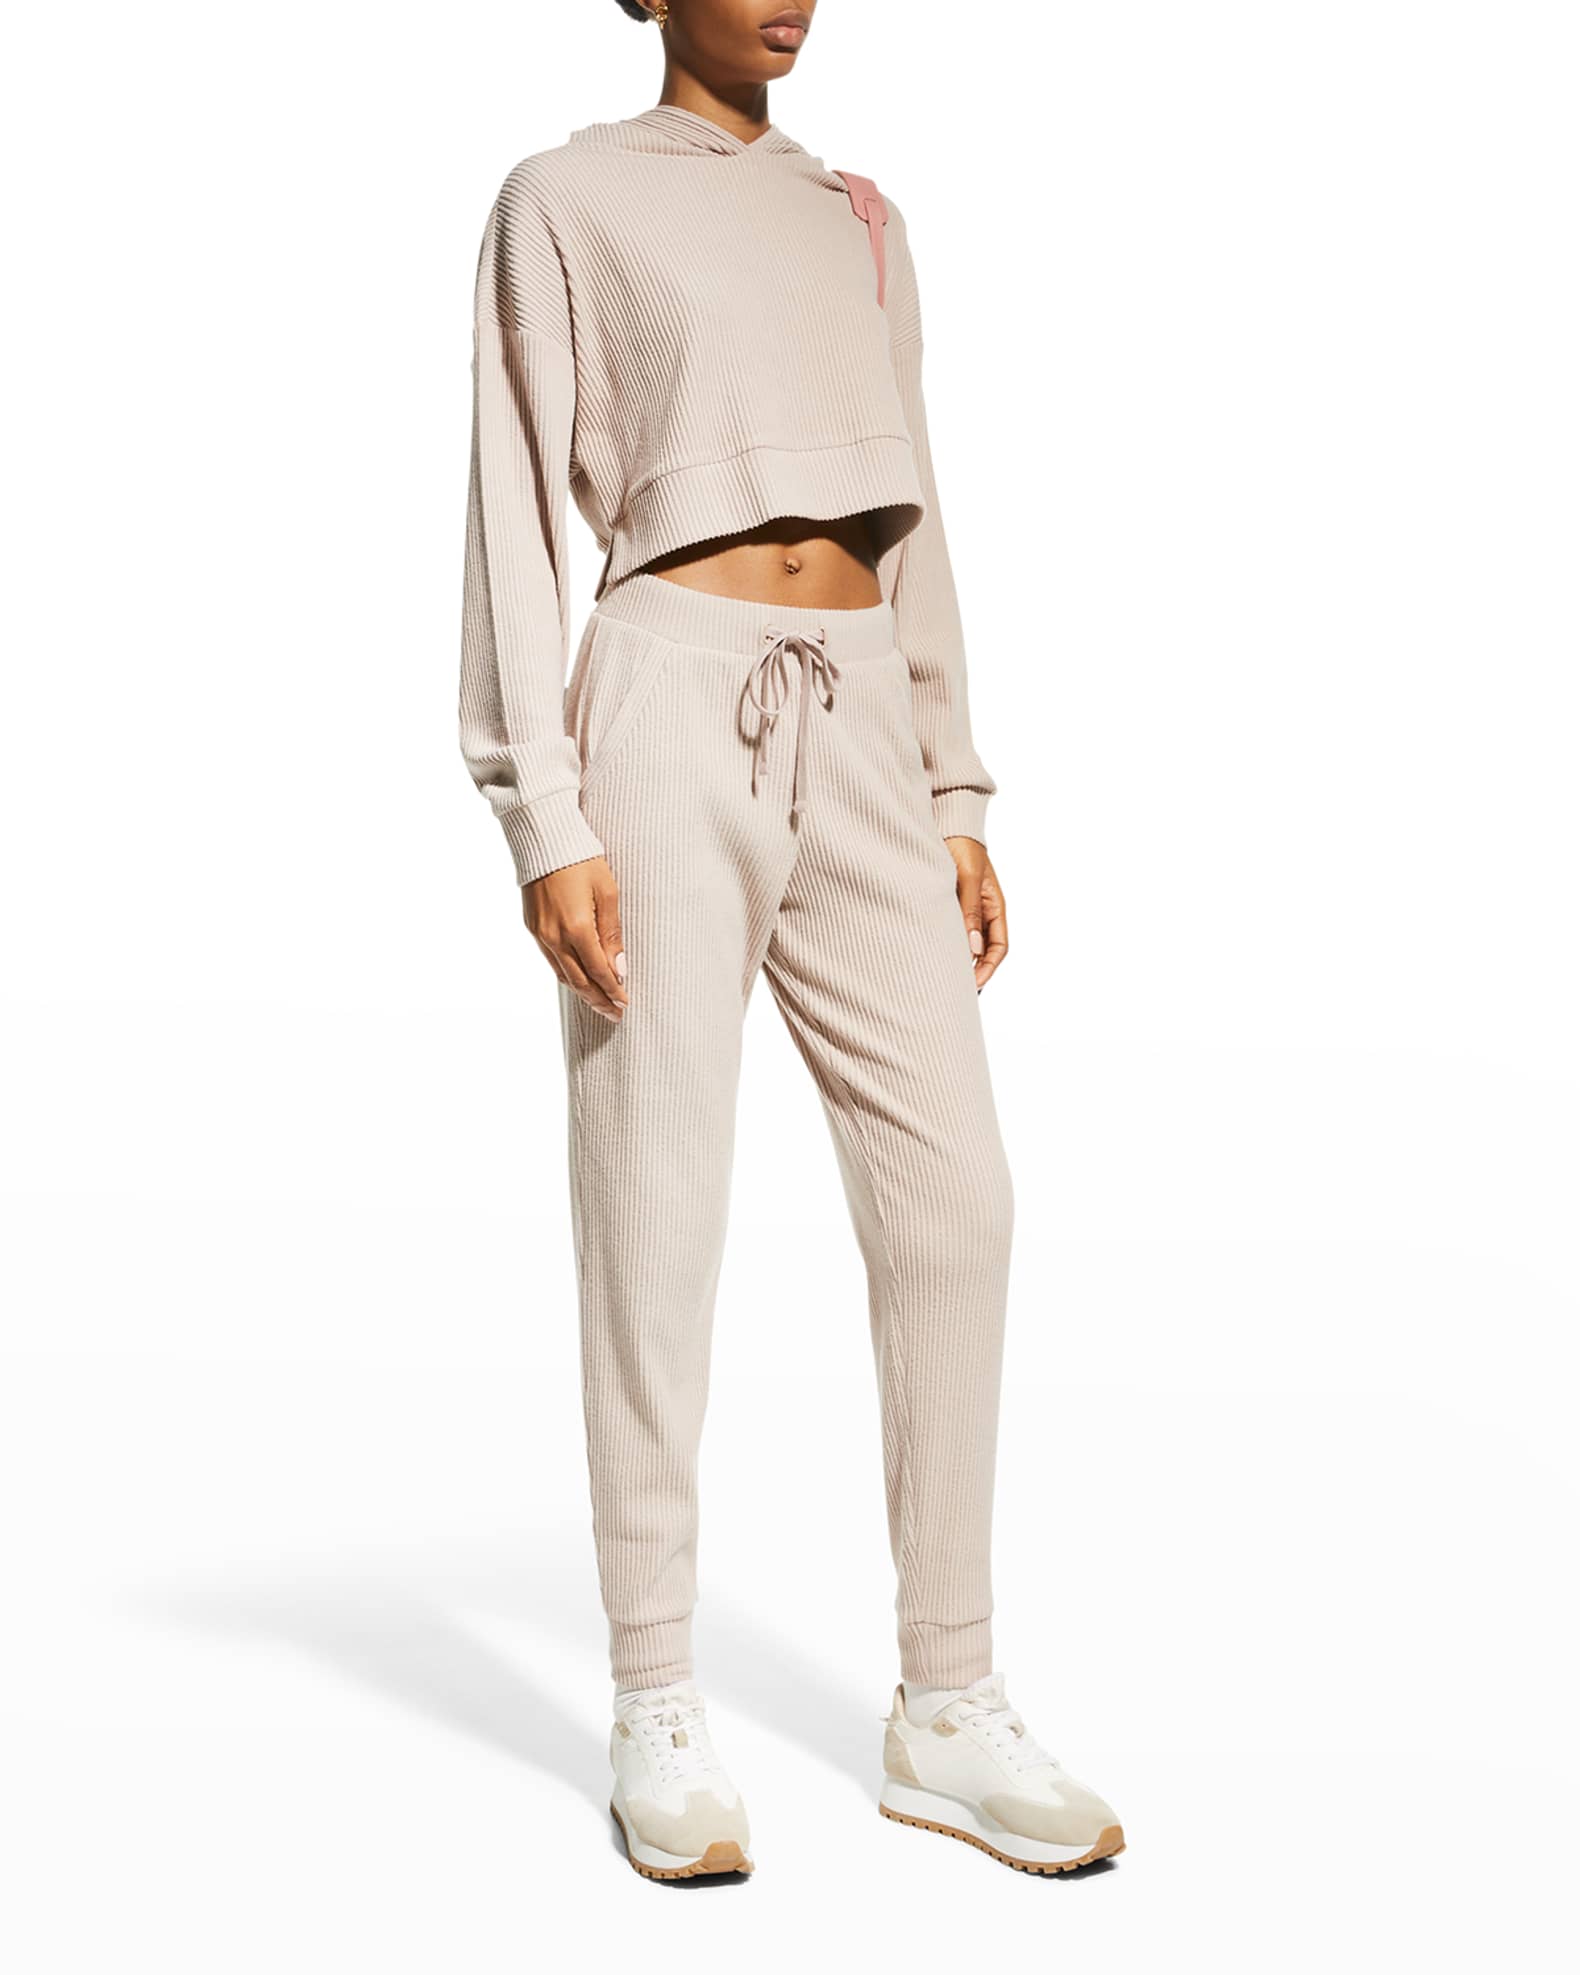 A Neutral Sweat Set: Alo Muse Hoodie and Sweatpant